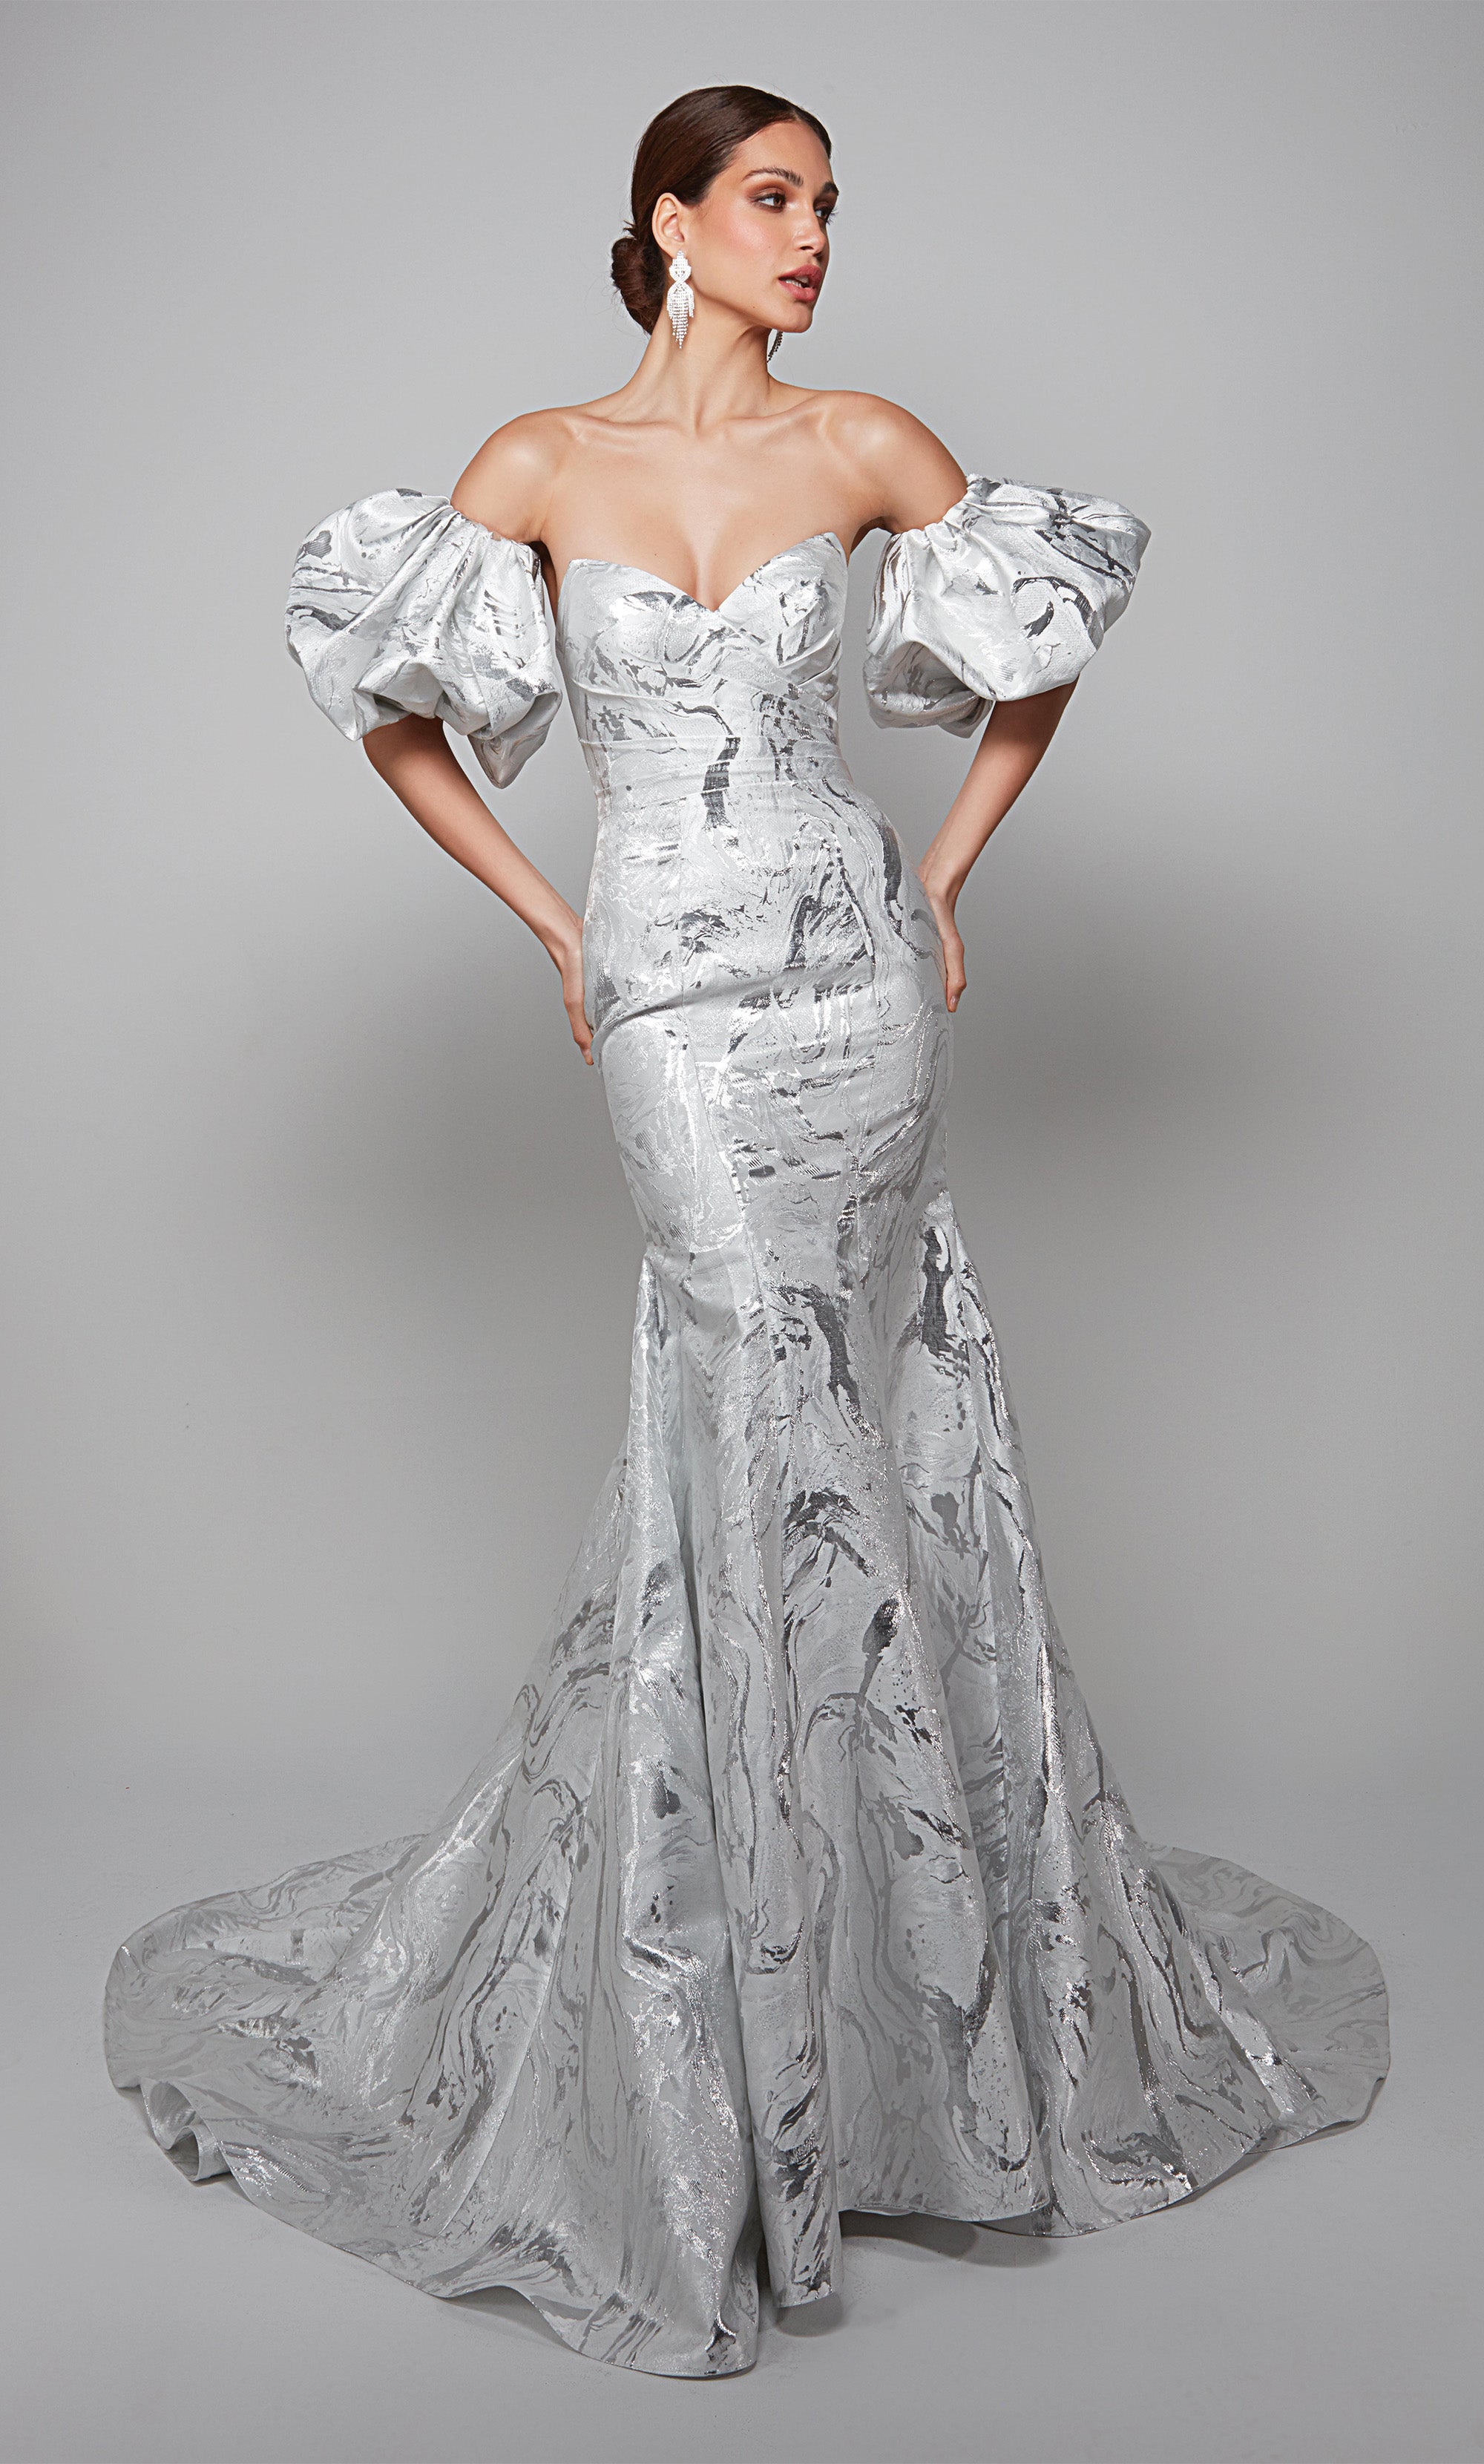 Beautiful Sparkly Silver Dress - Molly Nguyen Design